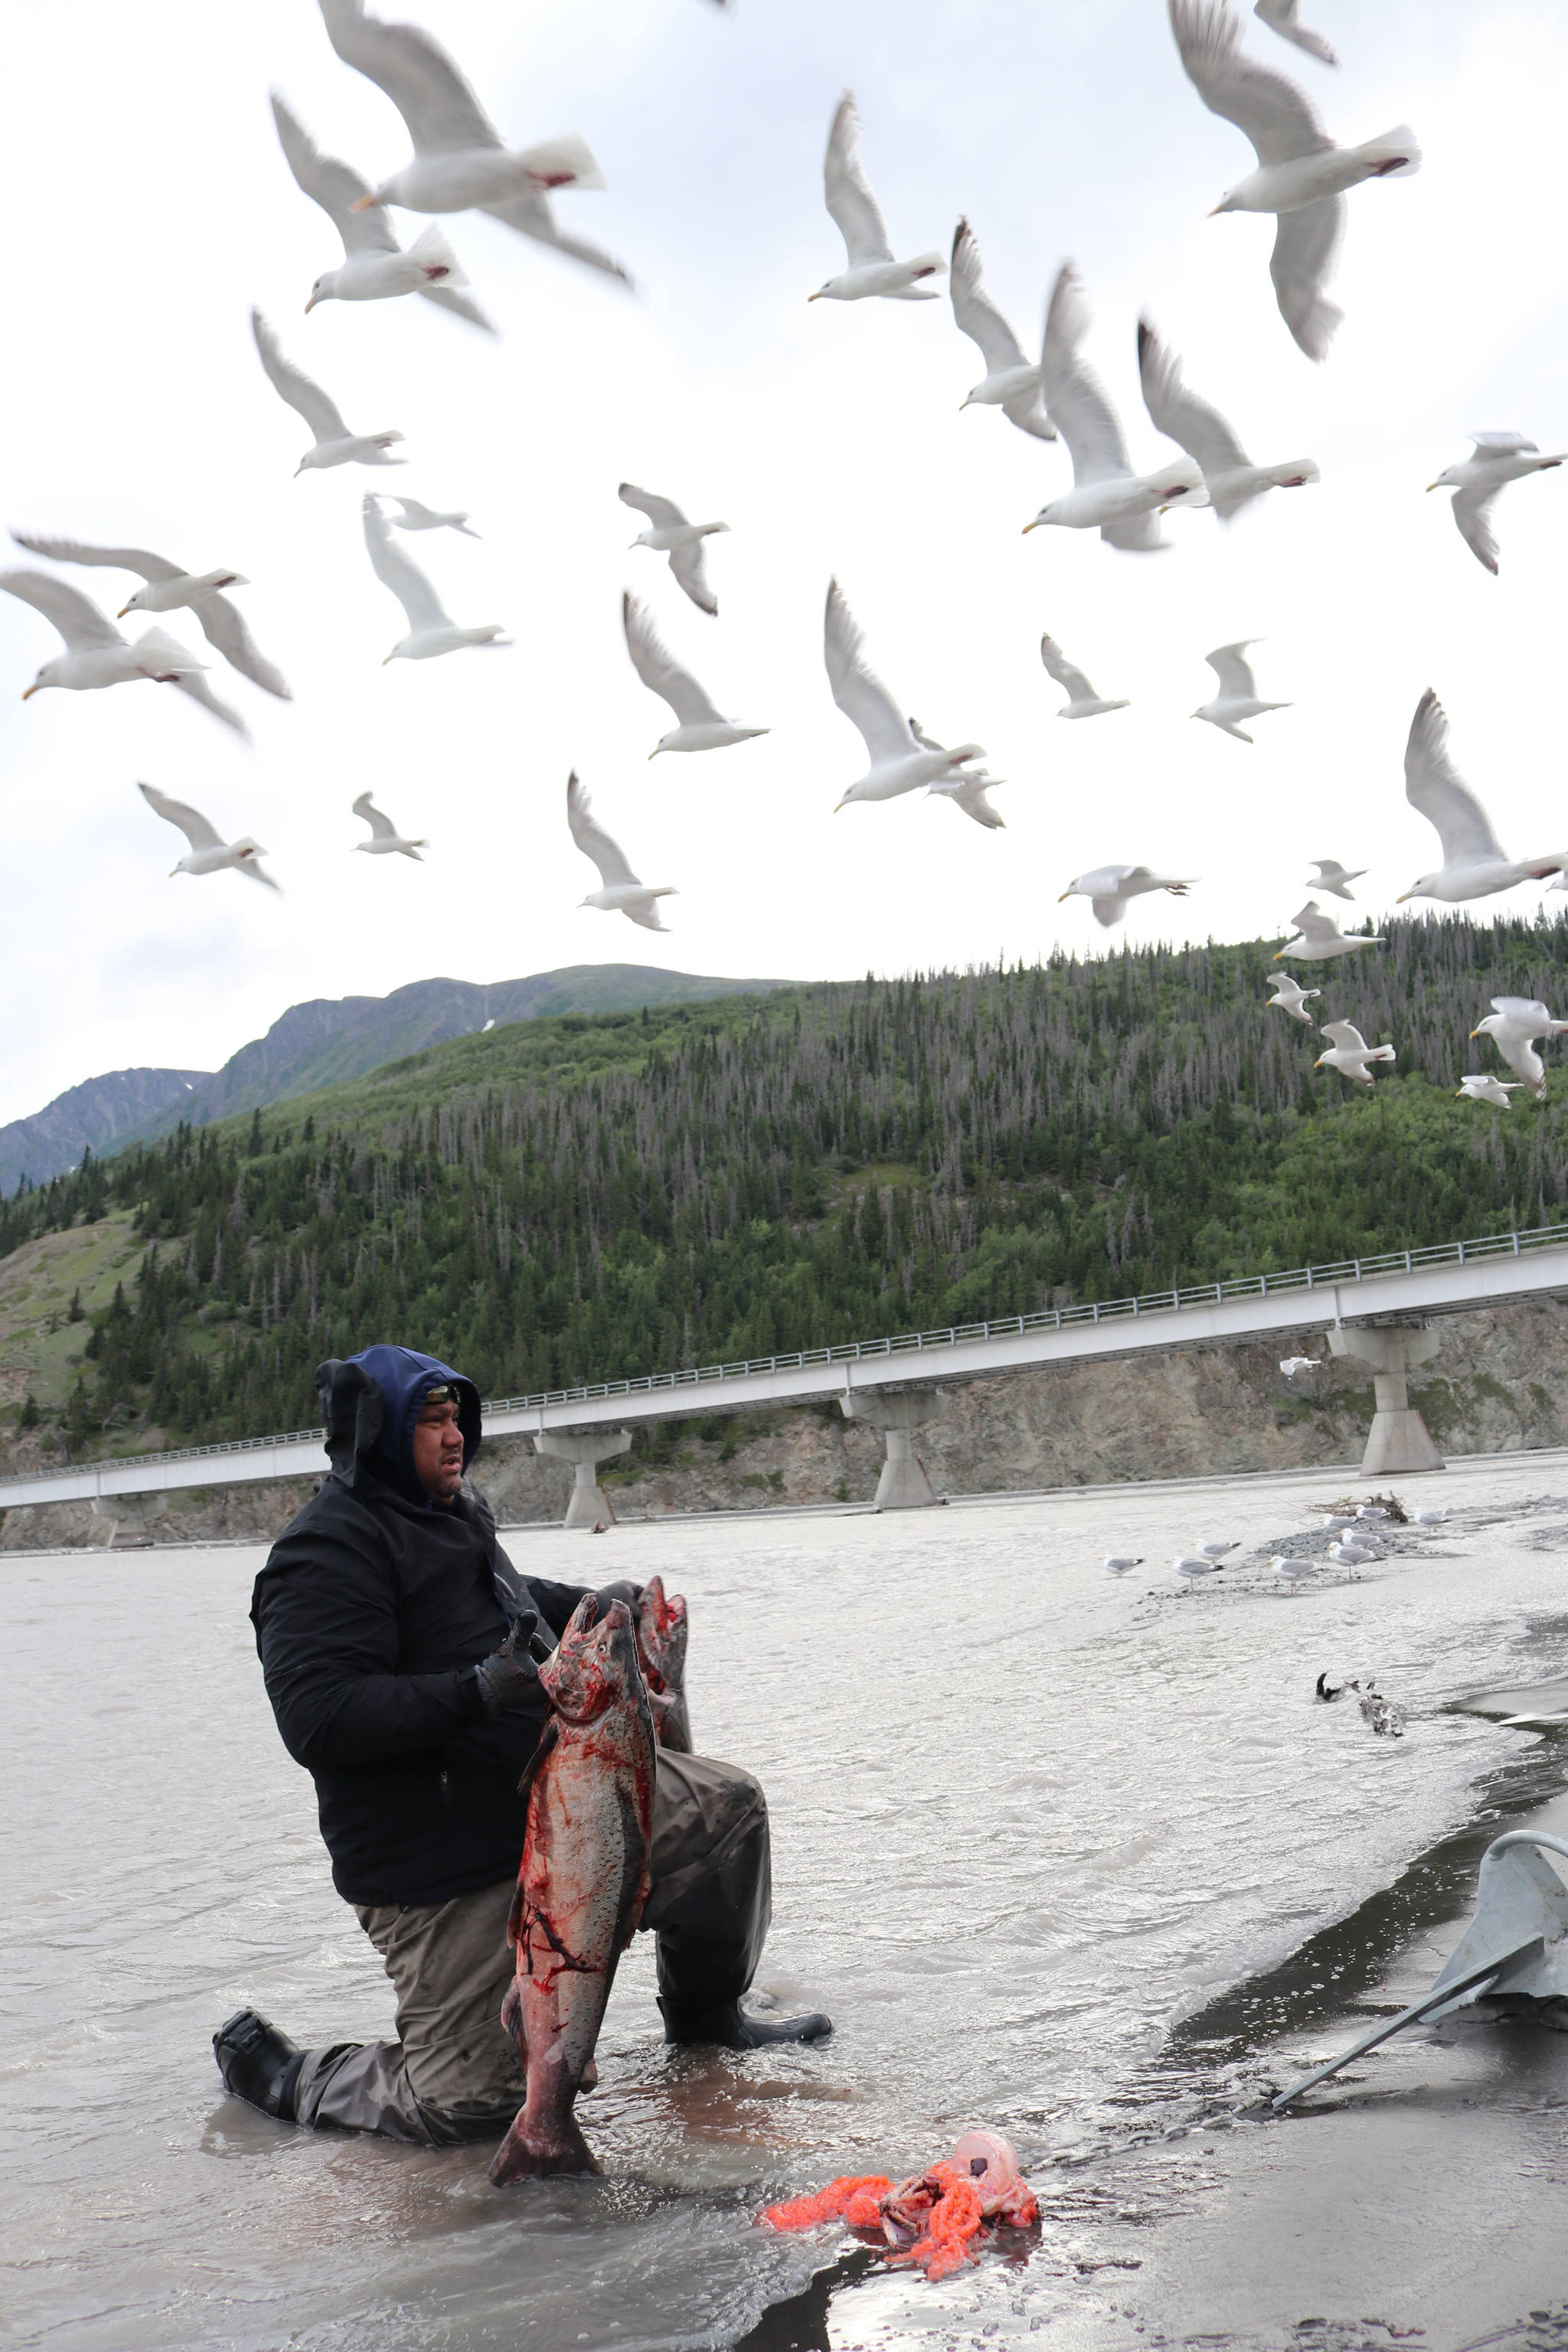 Tasi Fosi of Anchorage, who has been dipnetting in Chitina since 1991, holds up two king salmon on July 9, 2018 as seagulls hover overhead. (Photo courtesy Mary Catharine Martin)